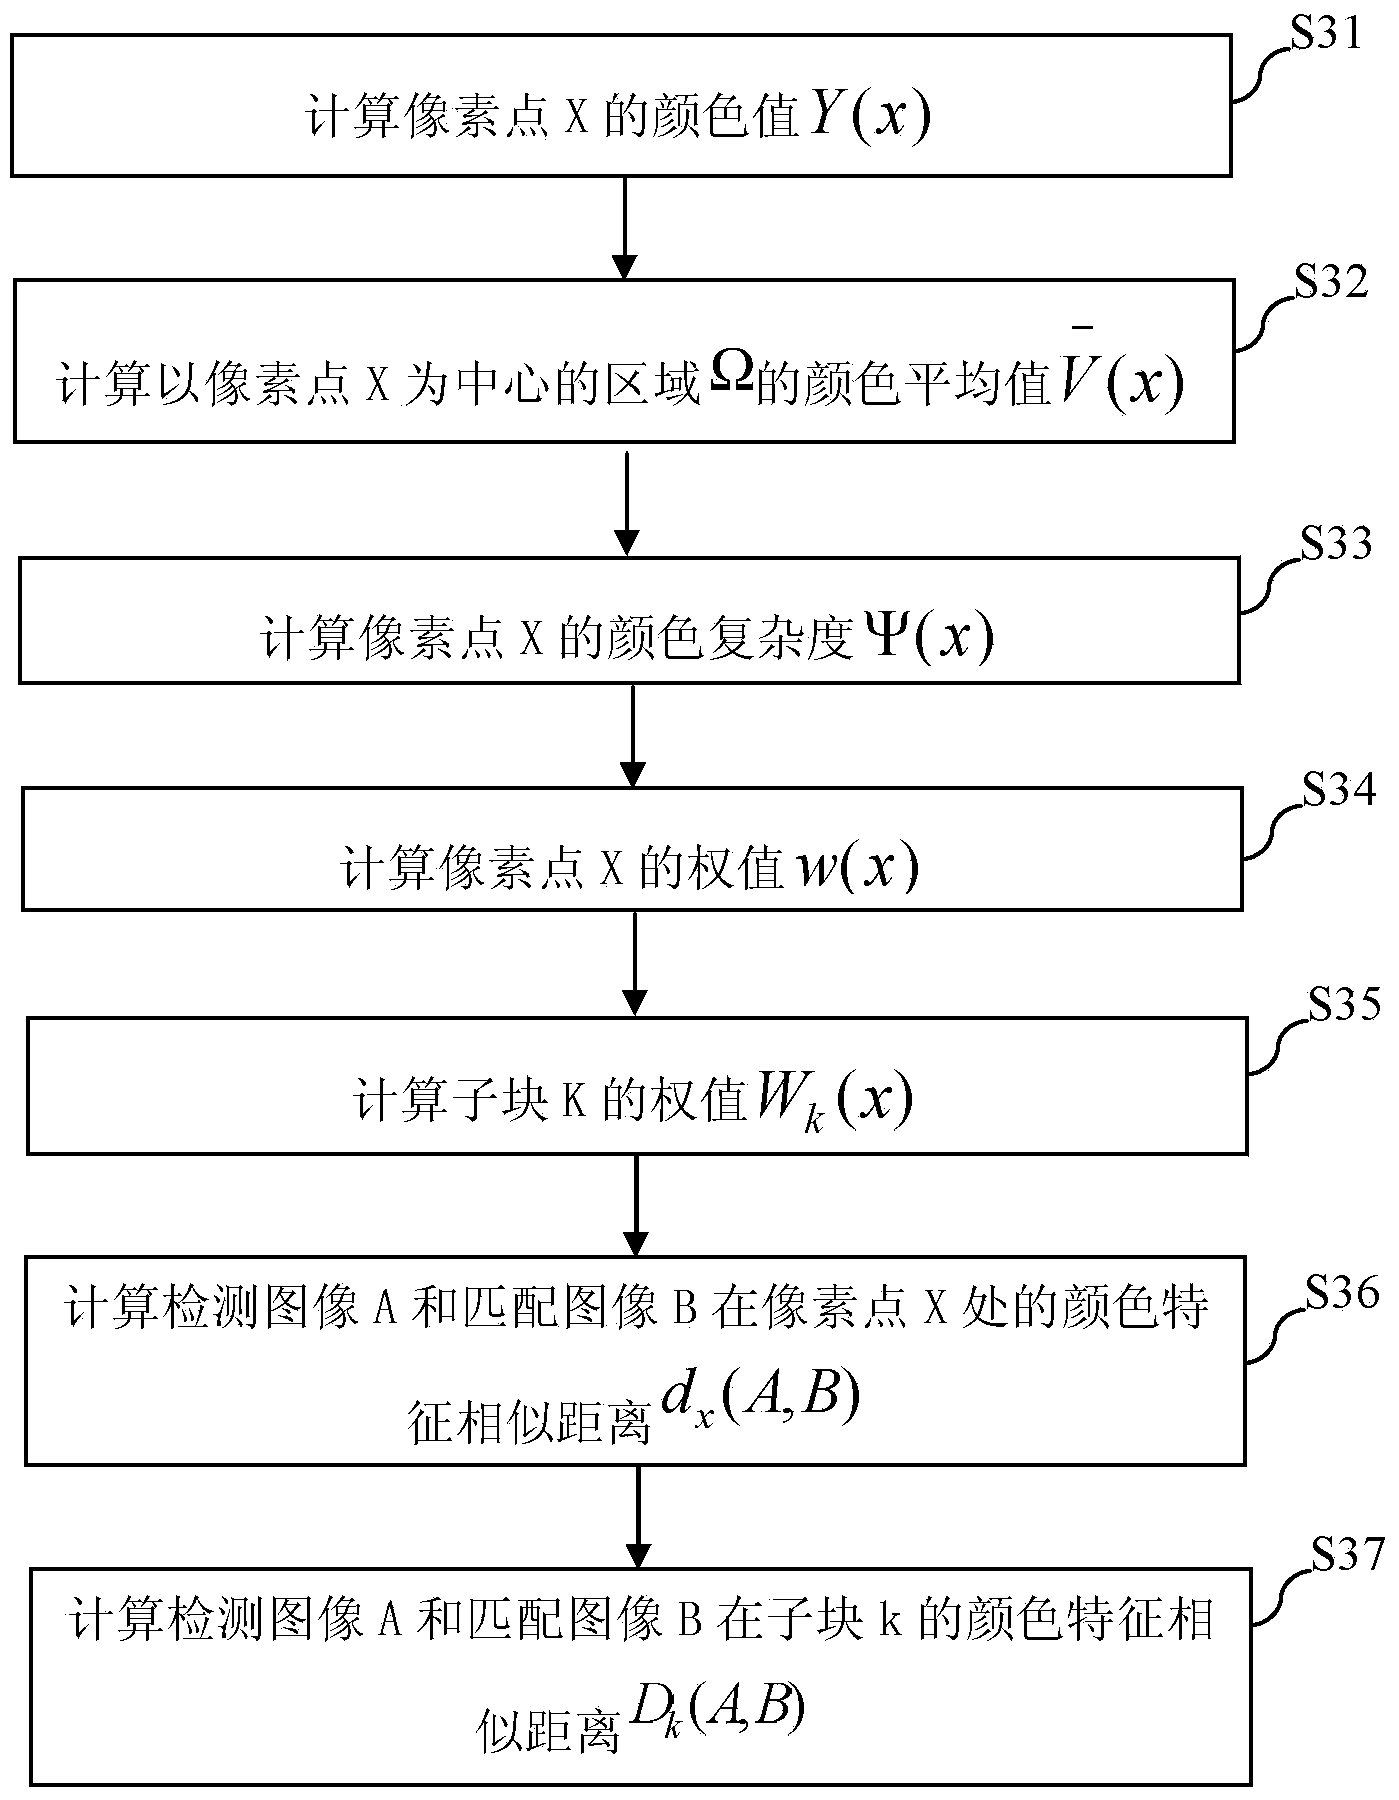 Image recognition method based on color and texture features